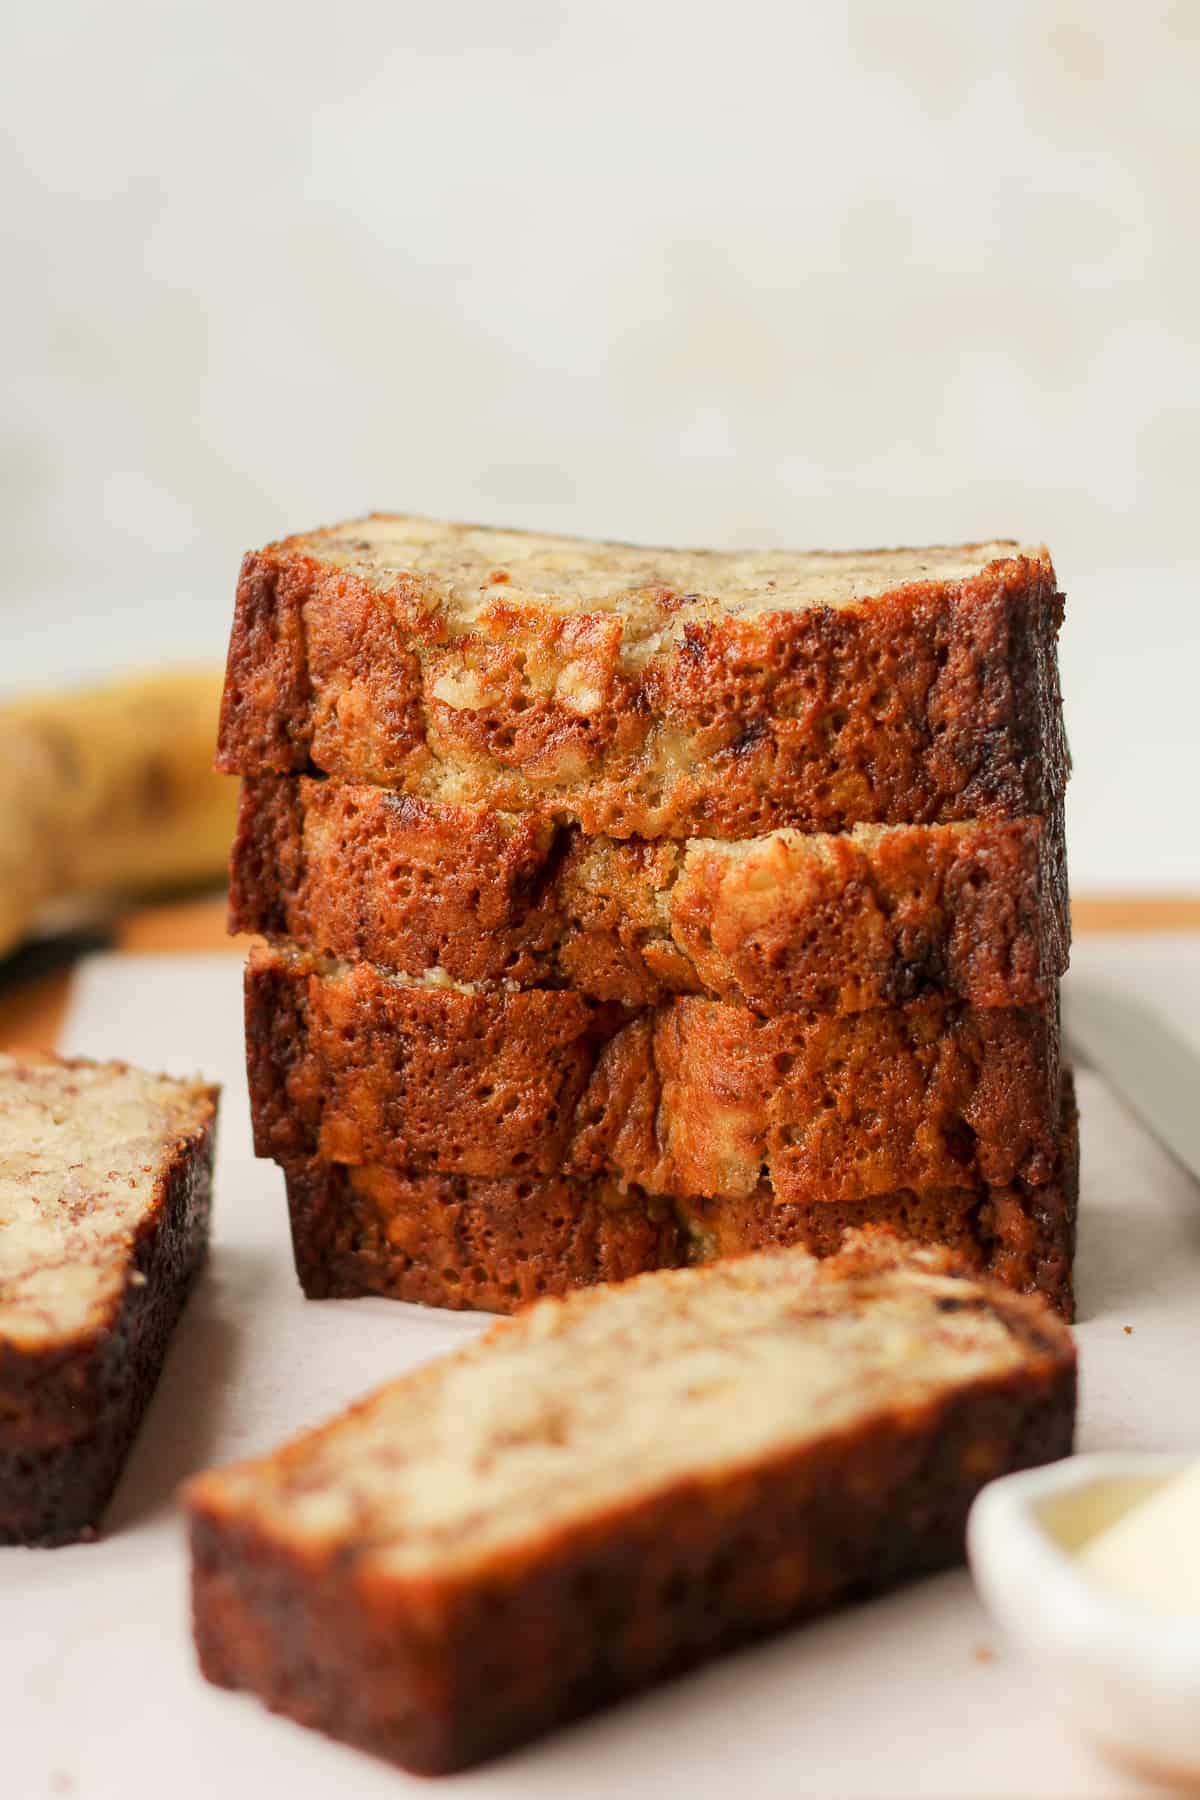 A stack of four slices of banana bread.